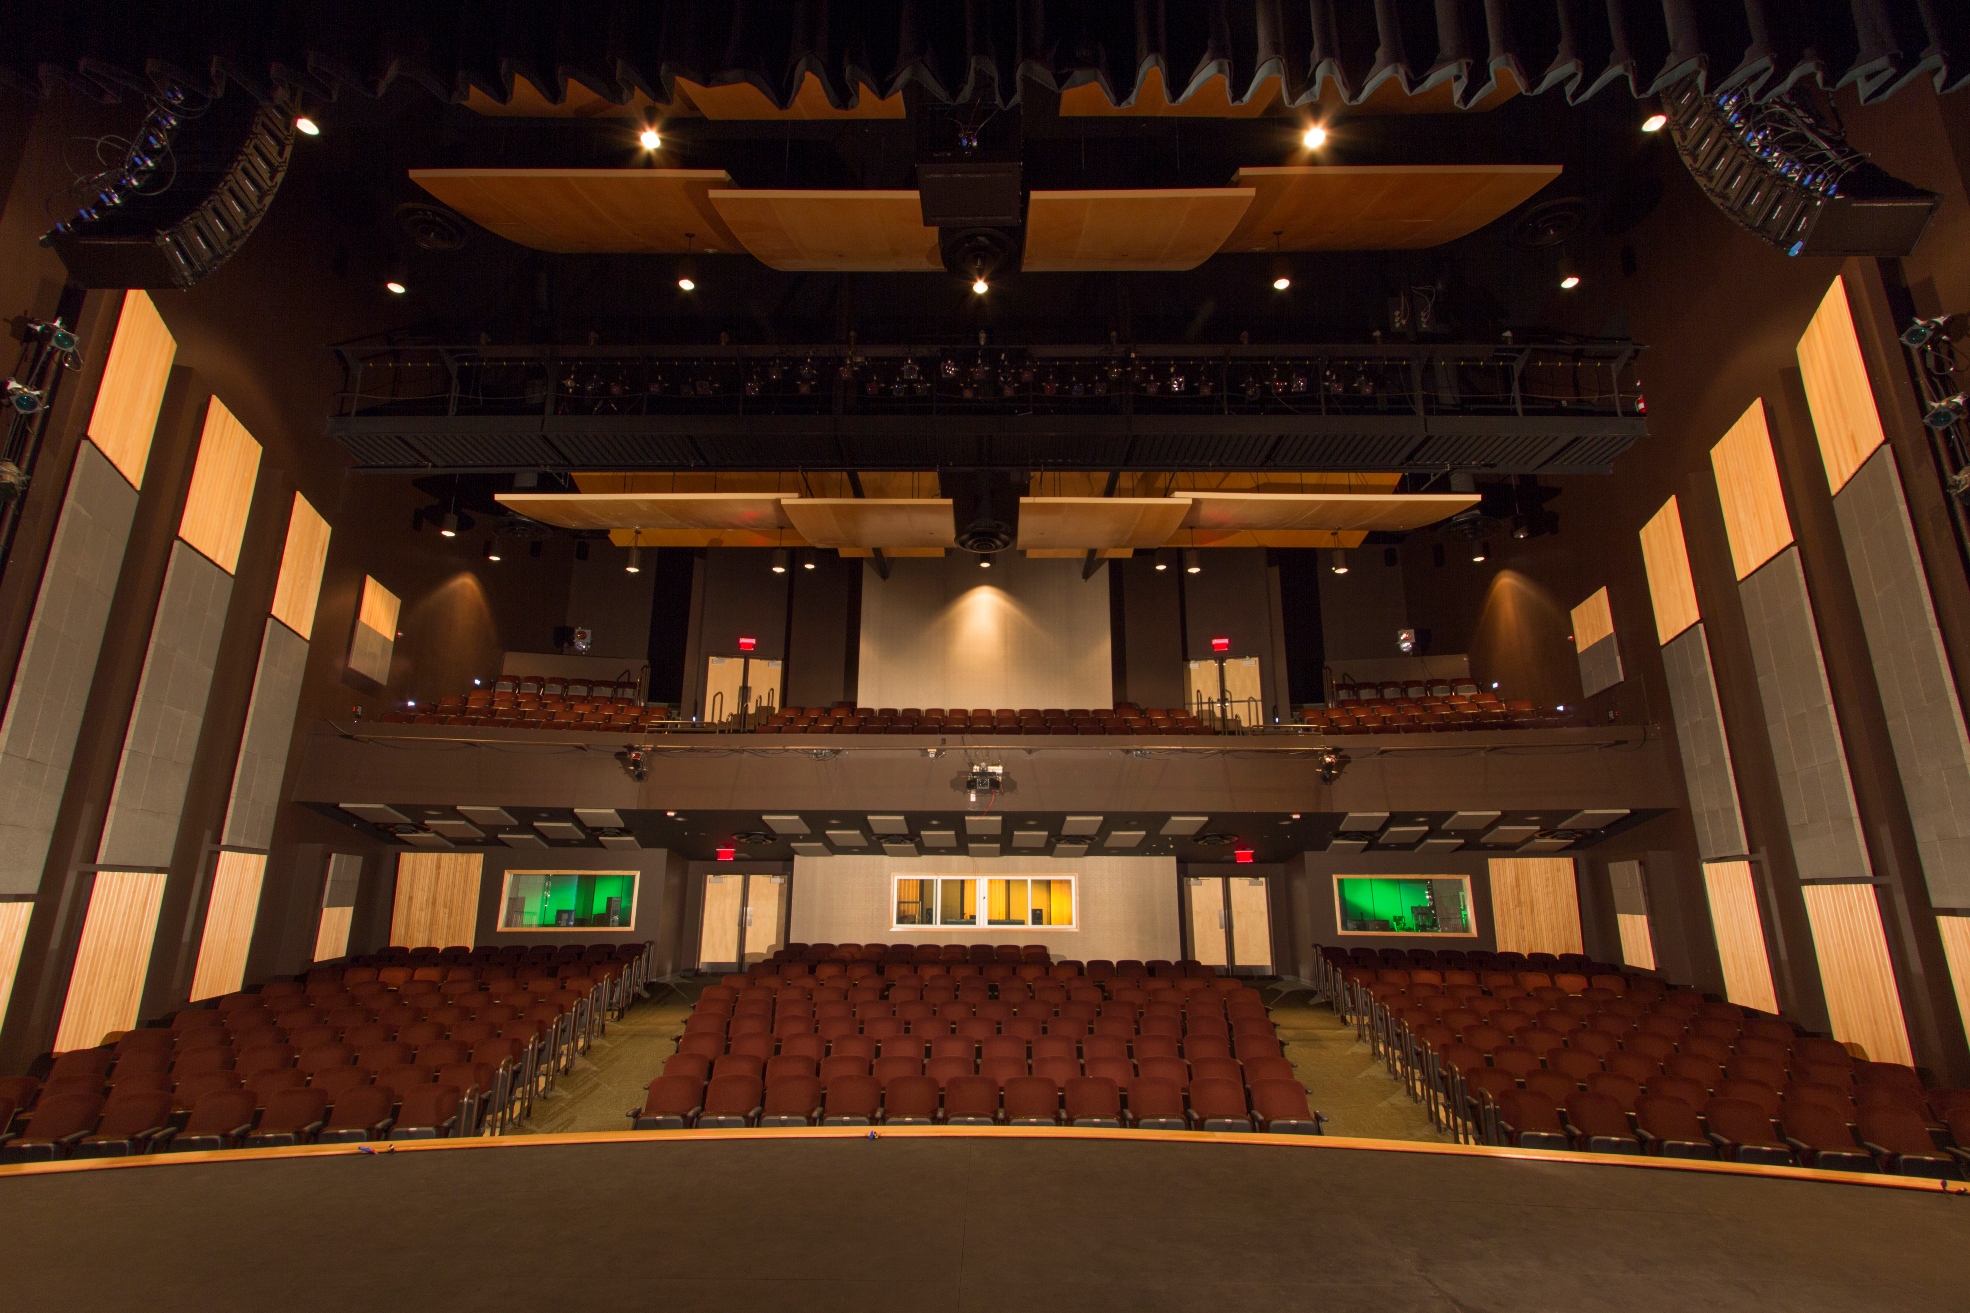 Husson University's Gracie Theatre seats approximately 500 people.